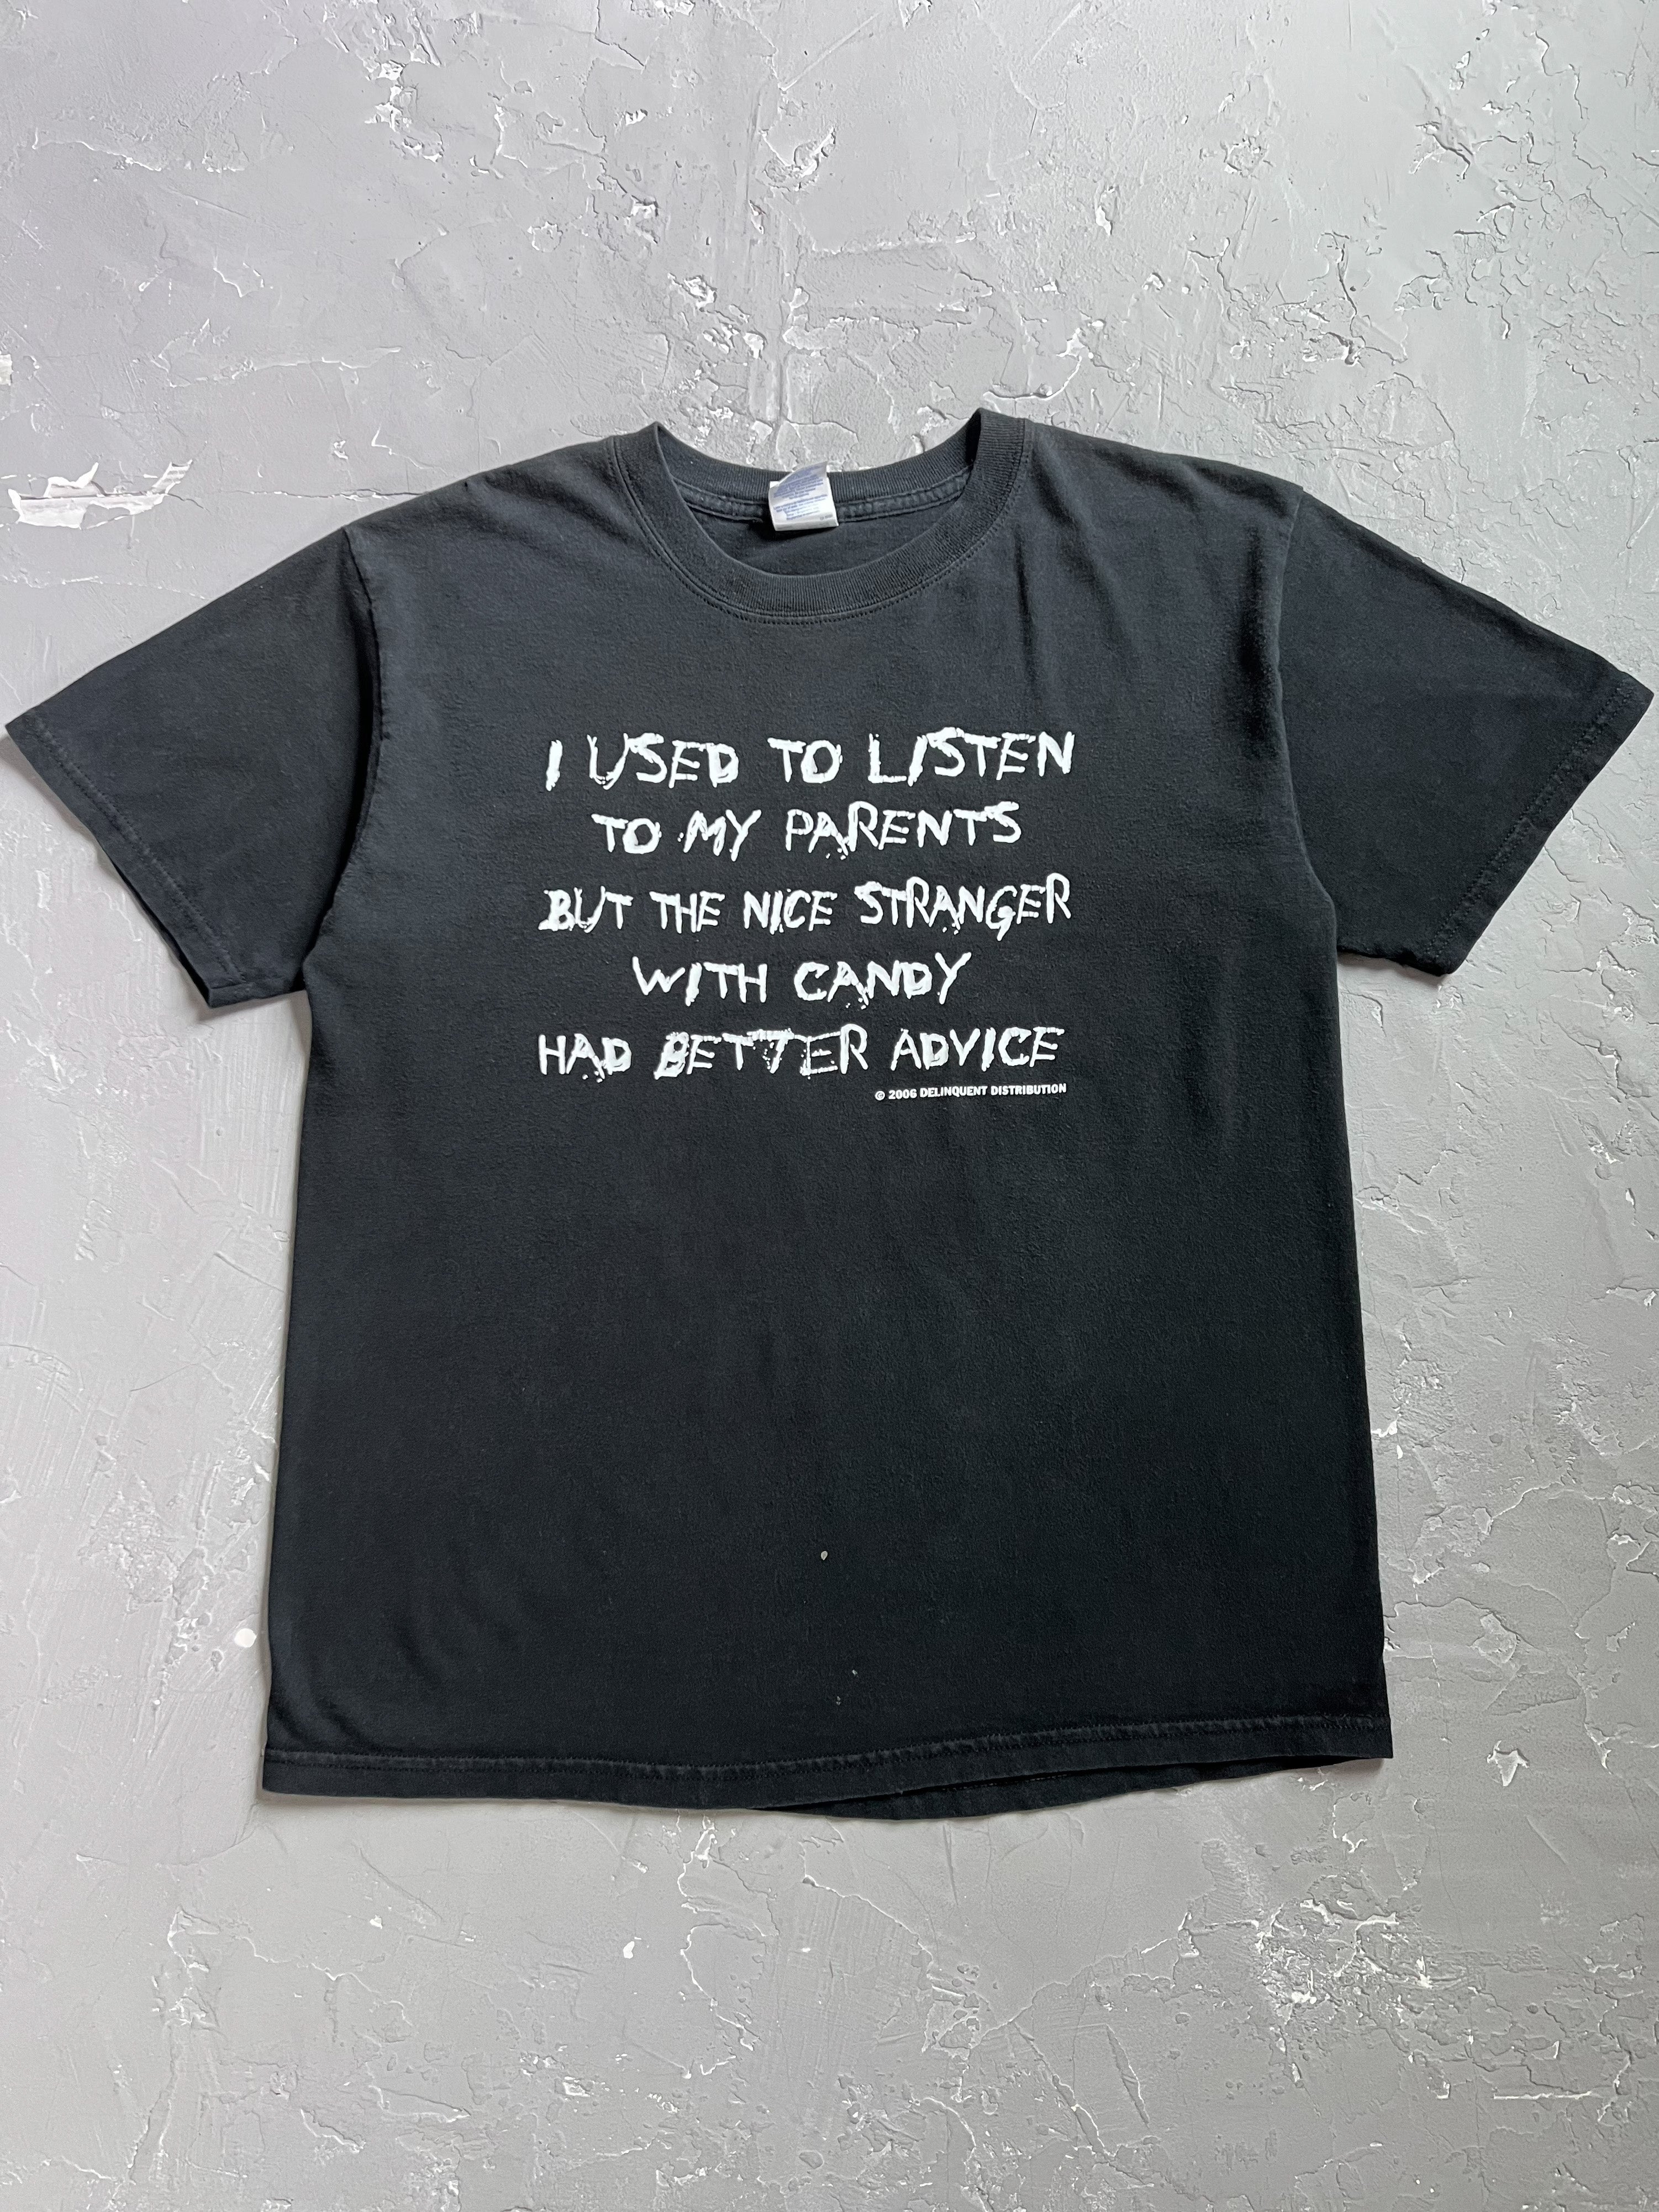 2000s “I Used To Listen To My Parents..” Tee [L]